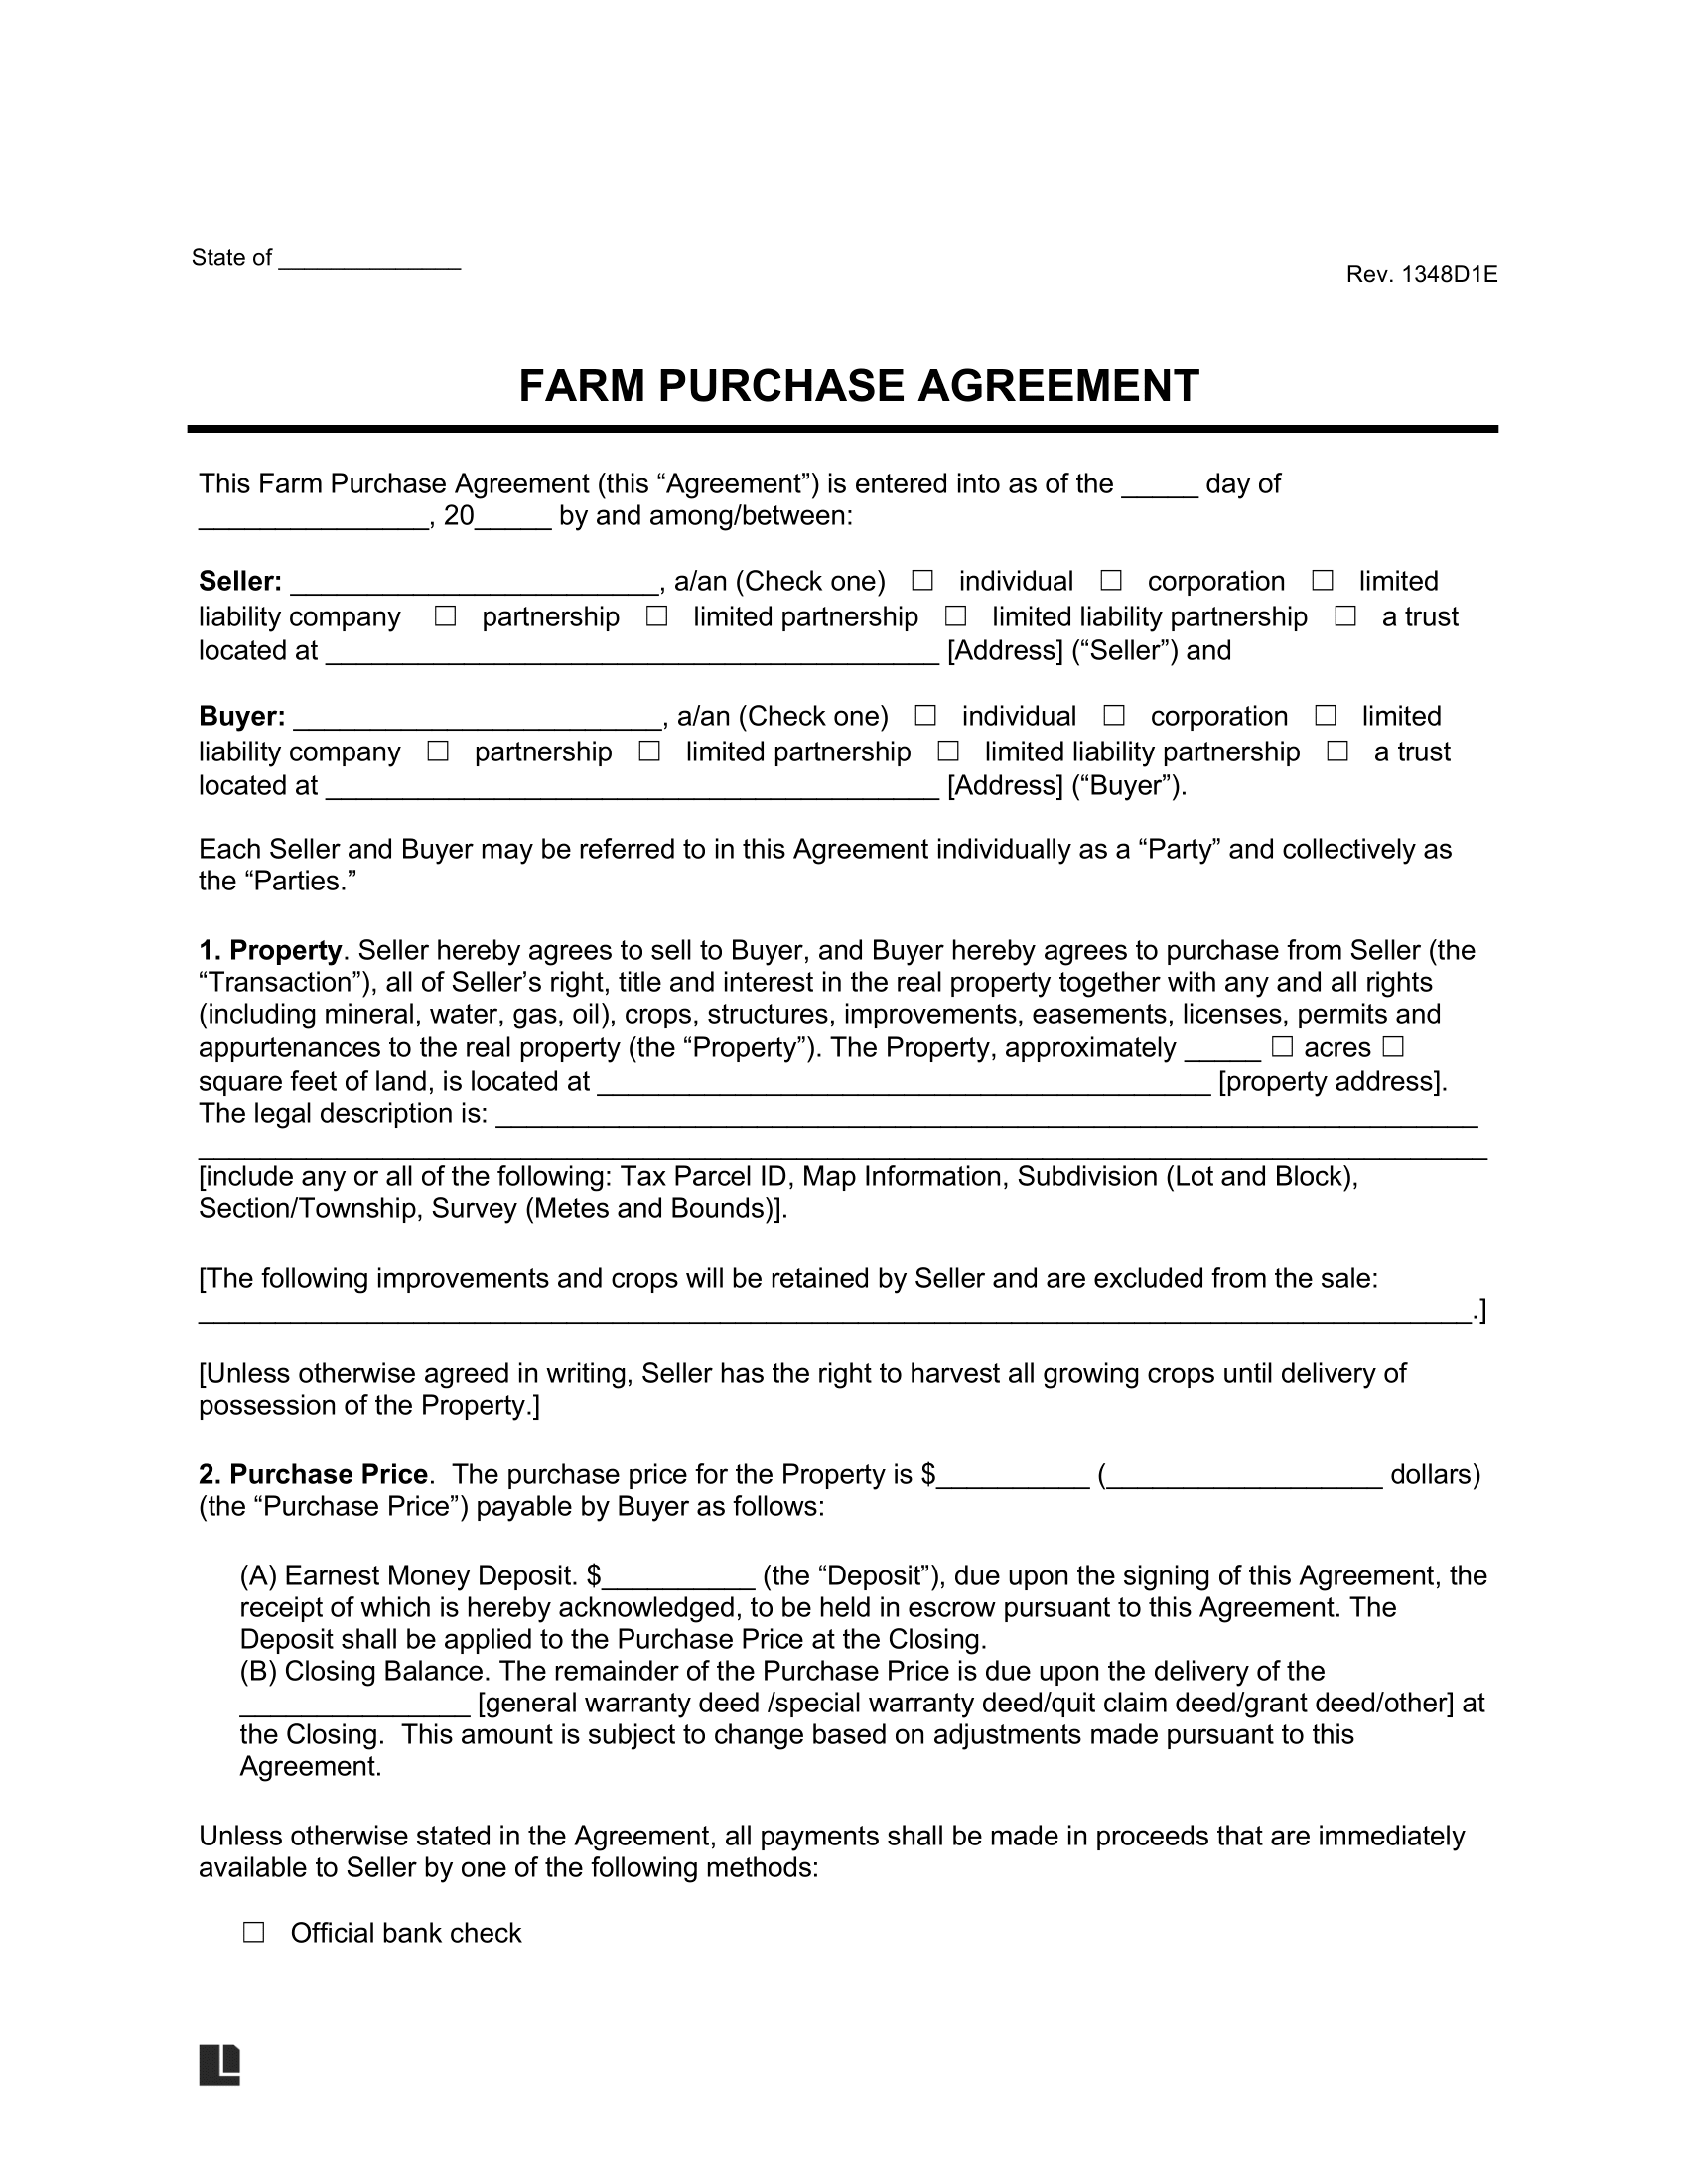 farm purchase agreement template